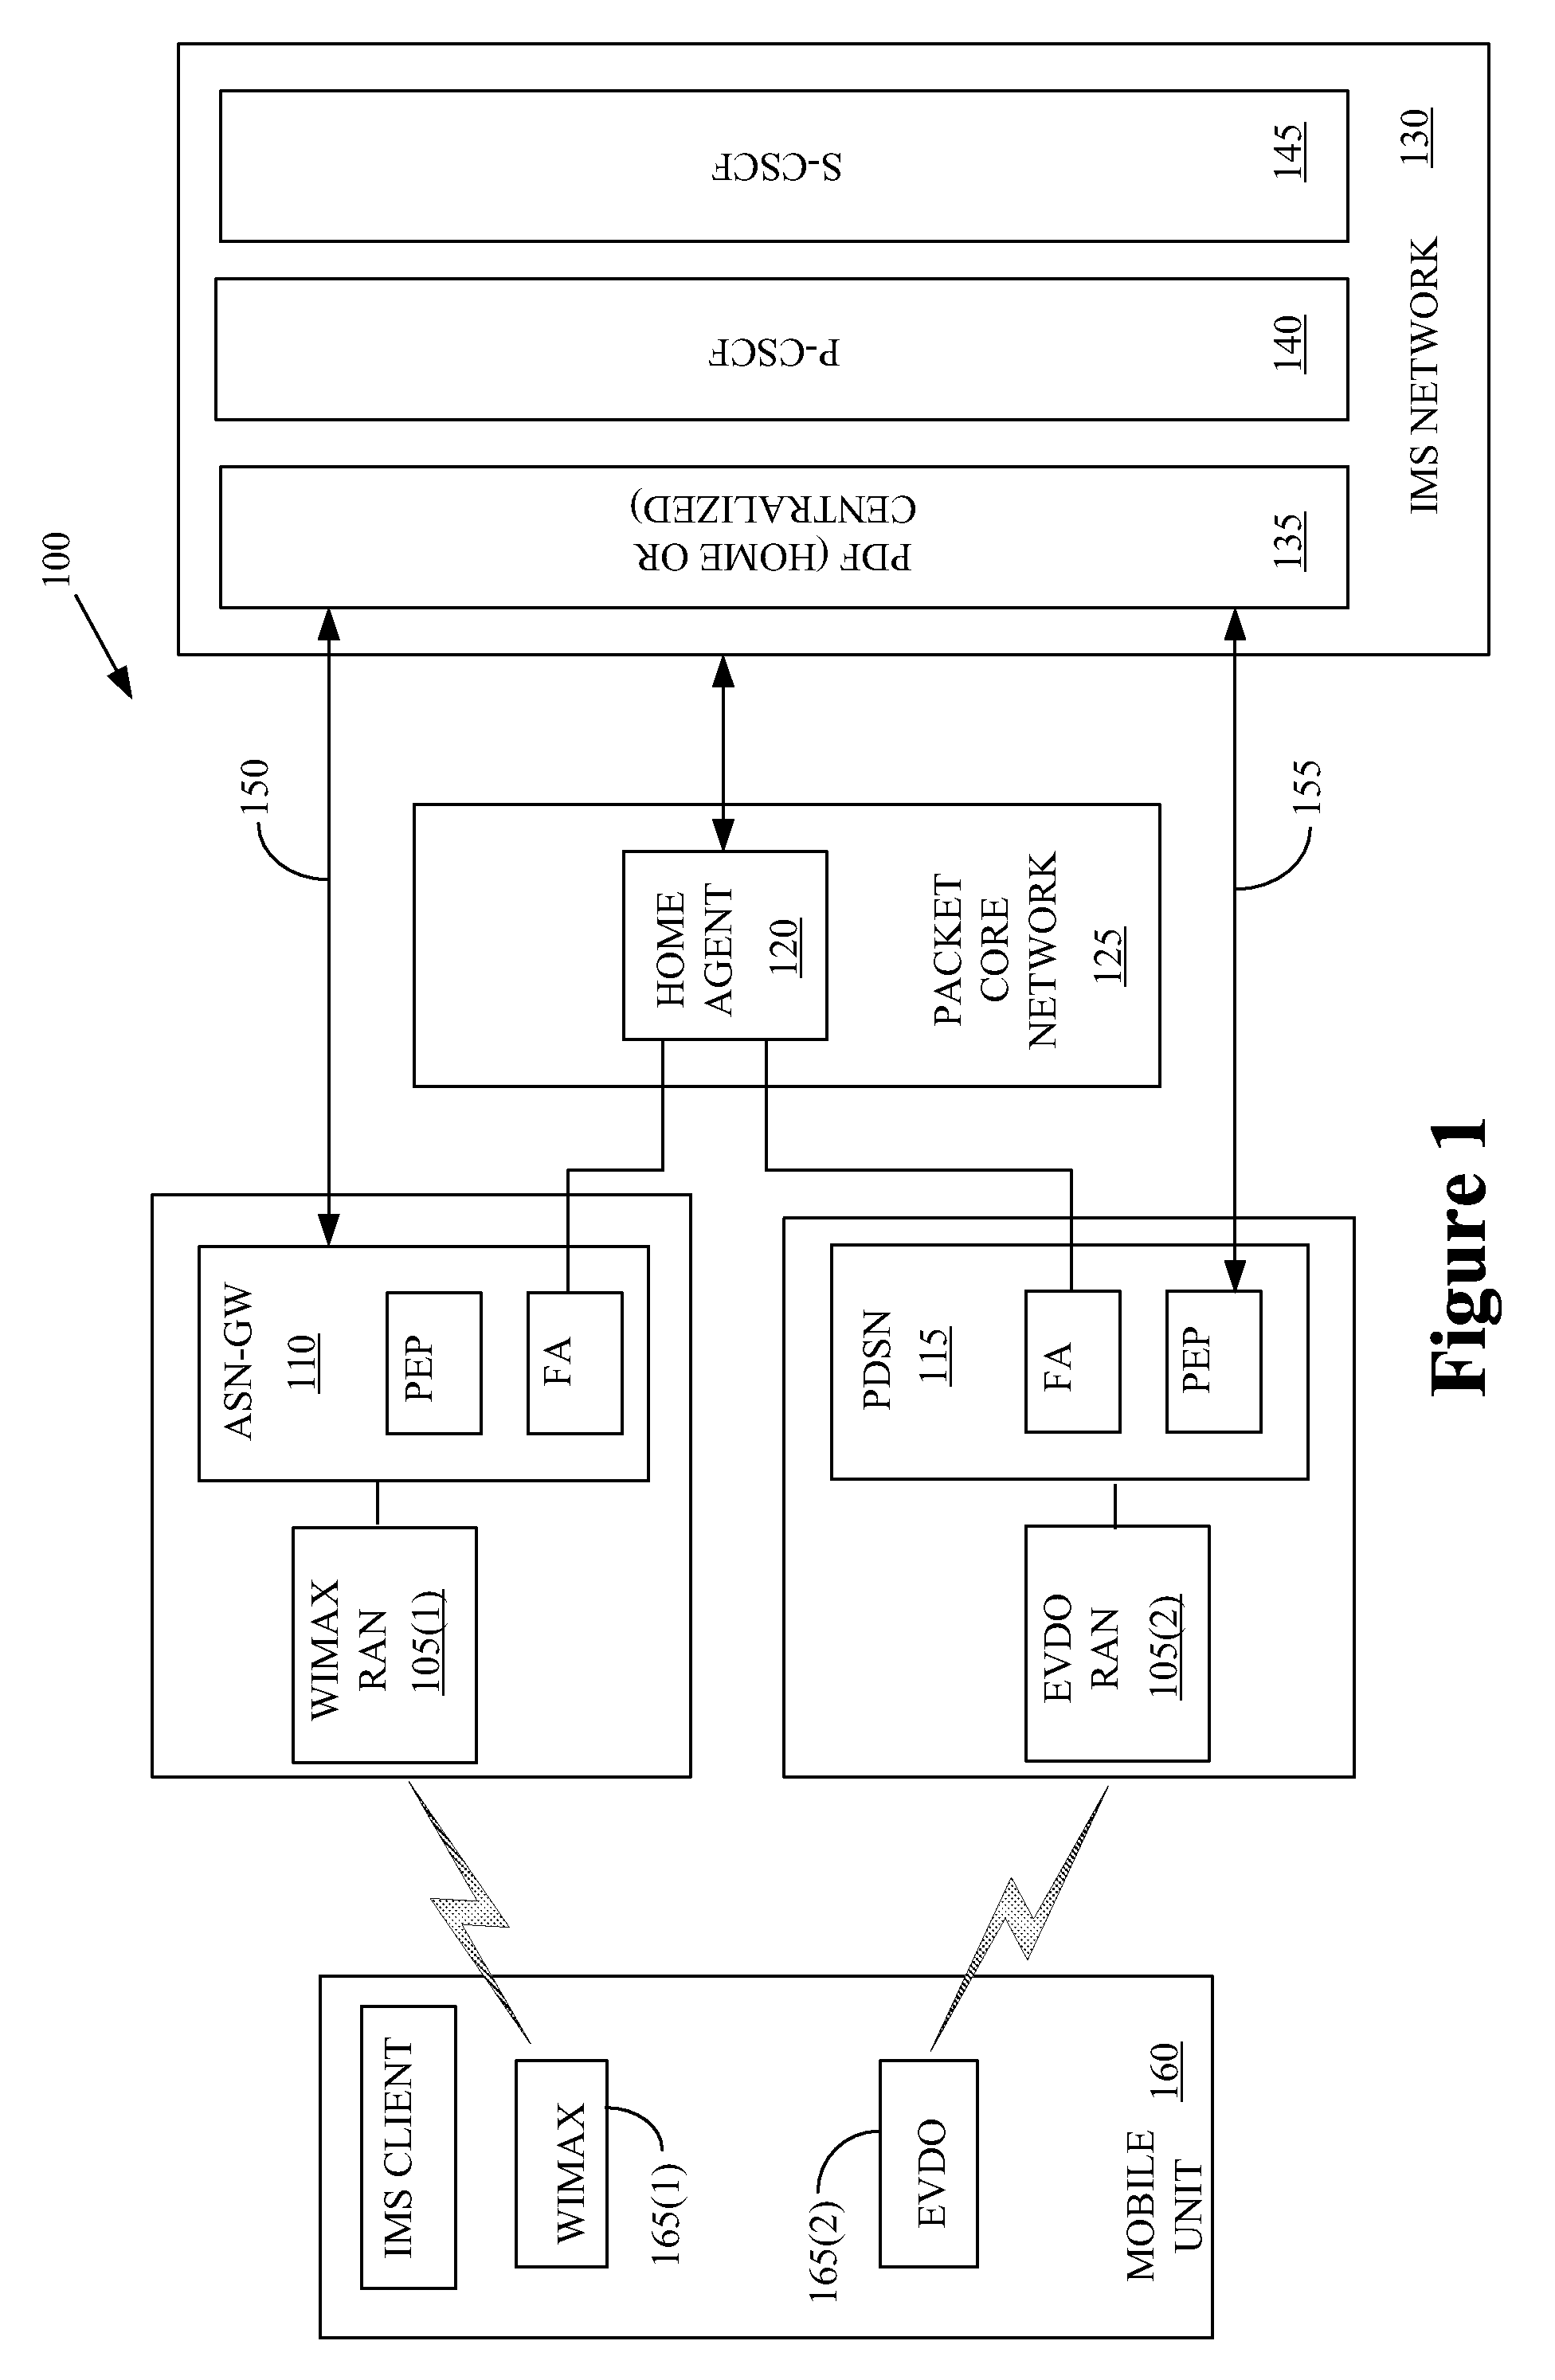 Method of supporting quality-of-service application session continuity during inter-technology handover using a common packet data function